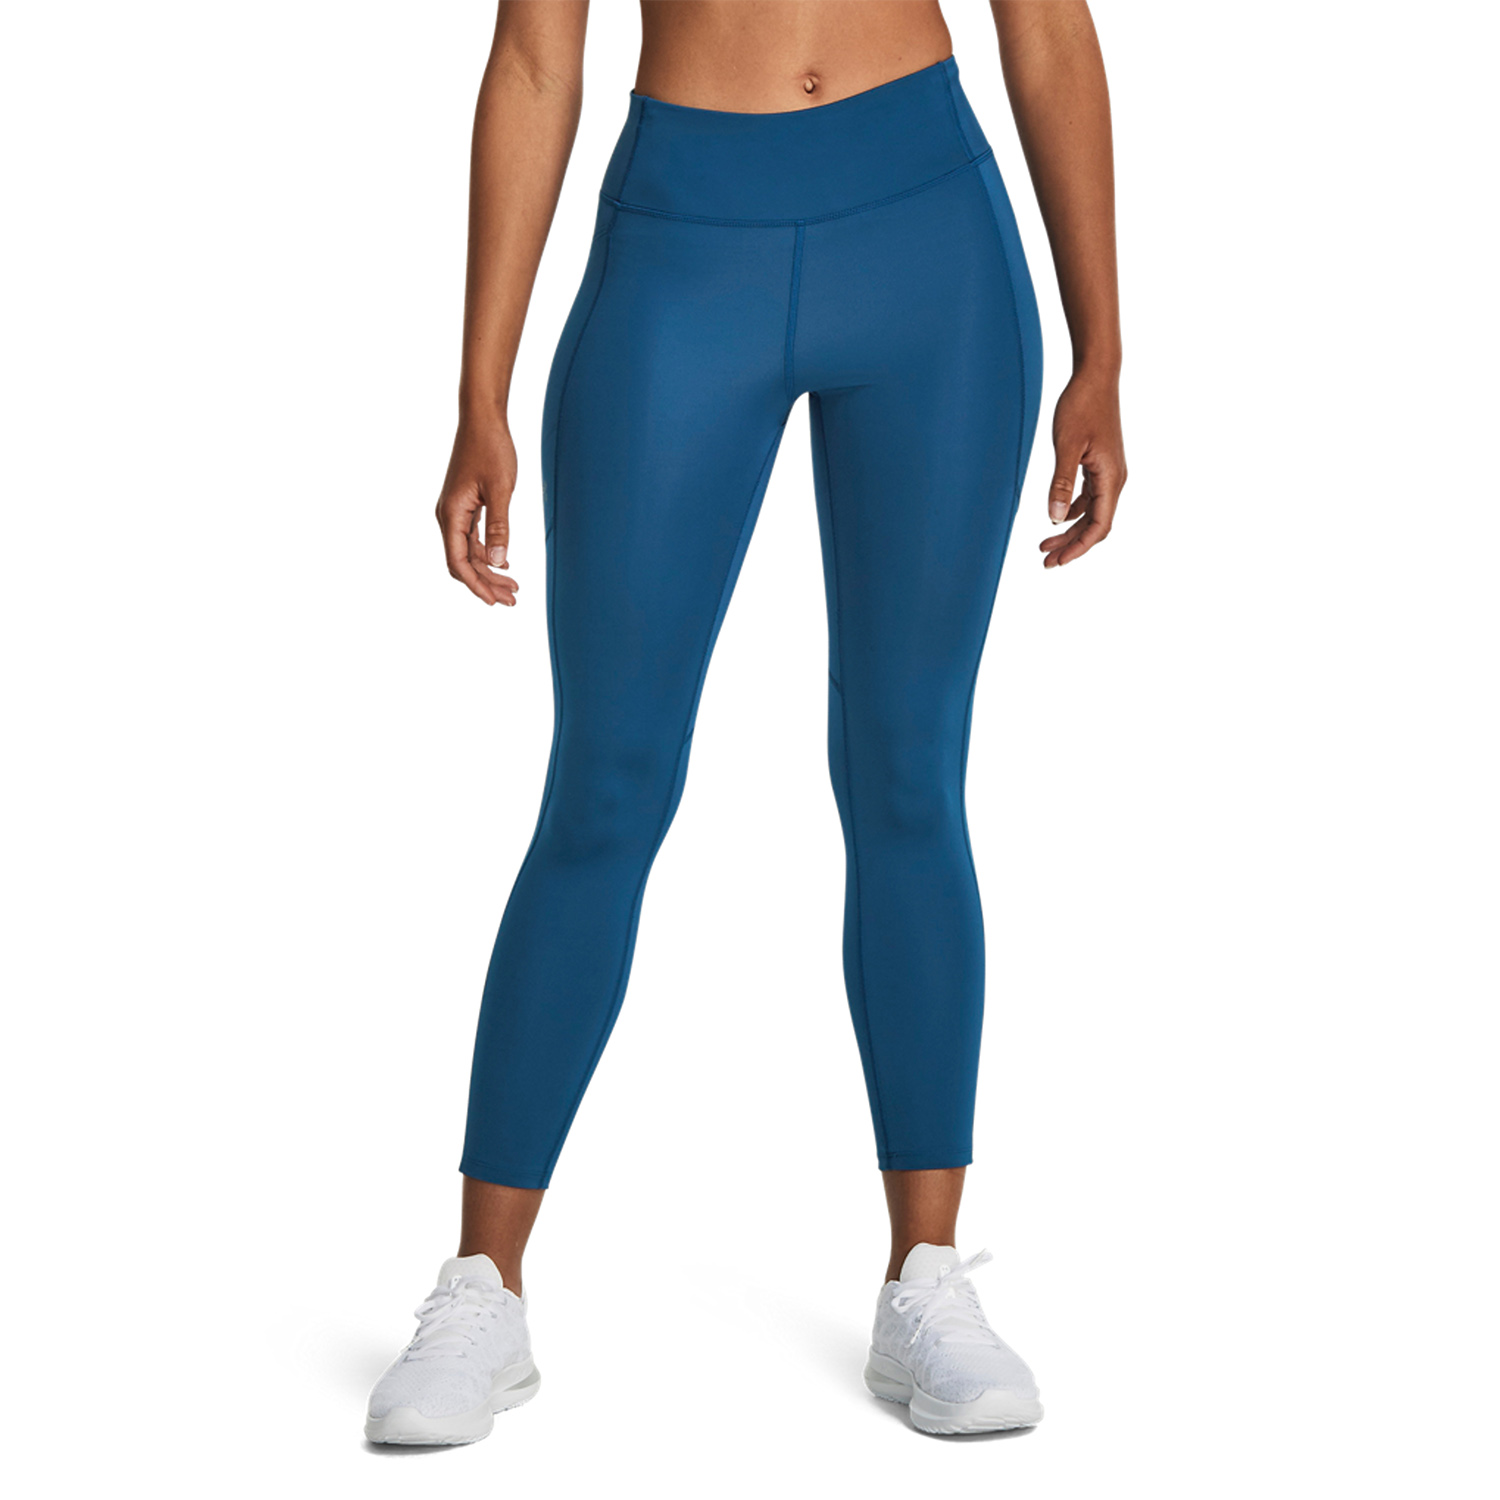 Malla Under Armour Correr Fly Fast 3.0 7/8 Mujer